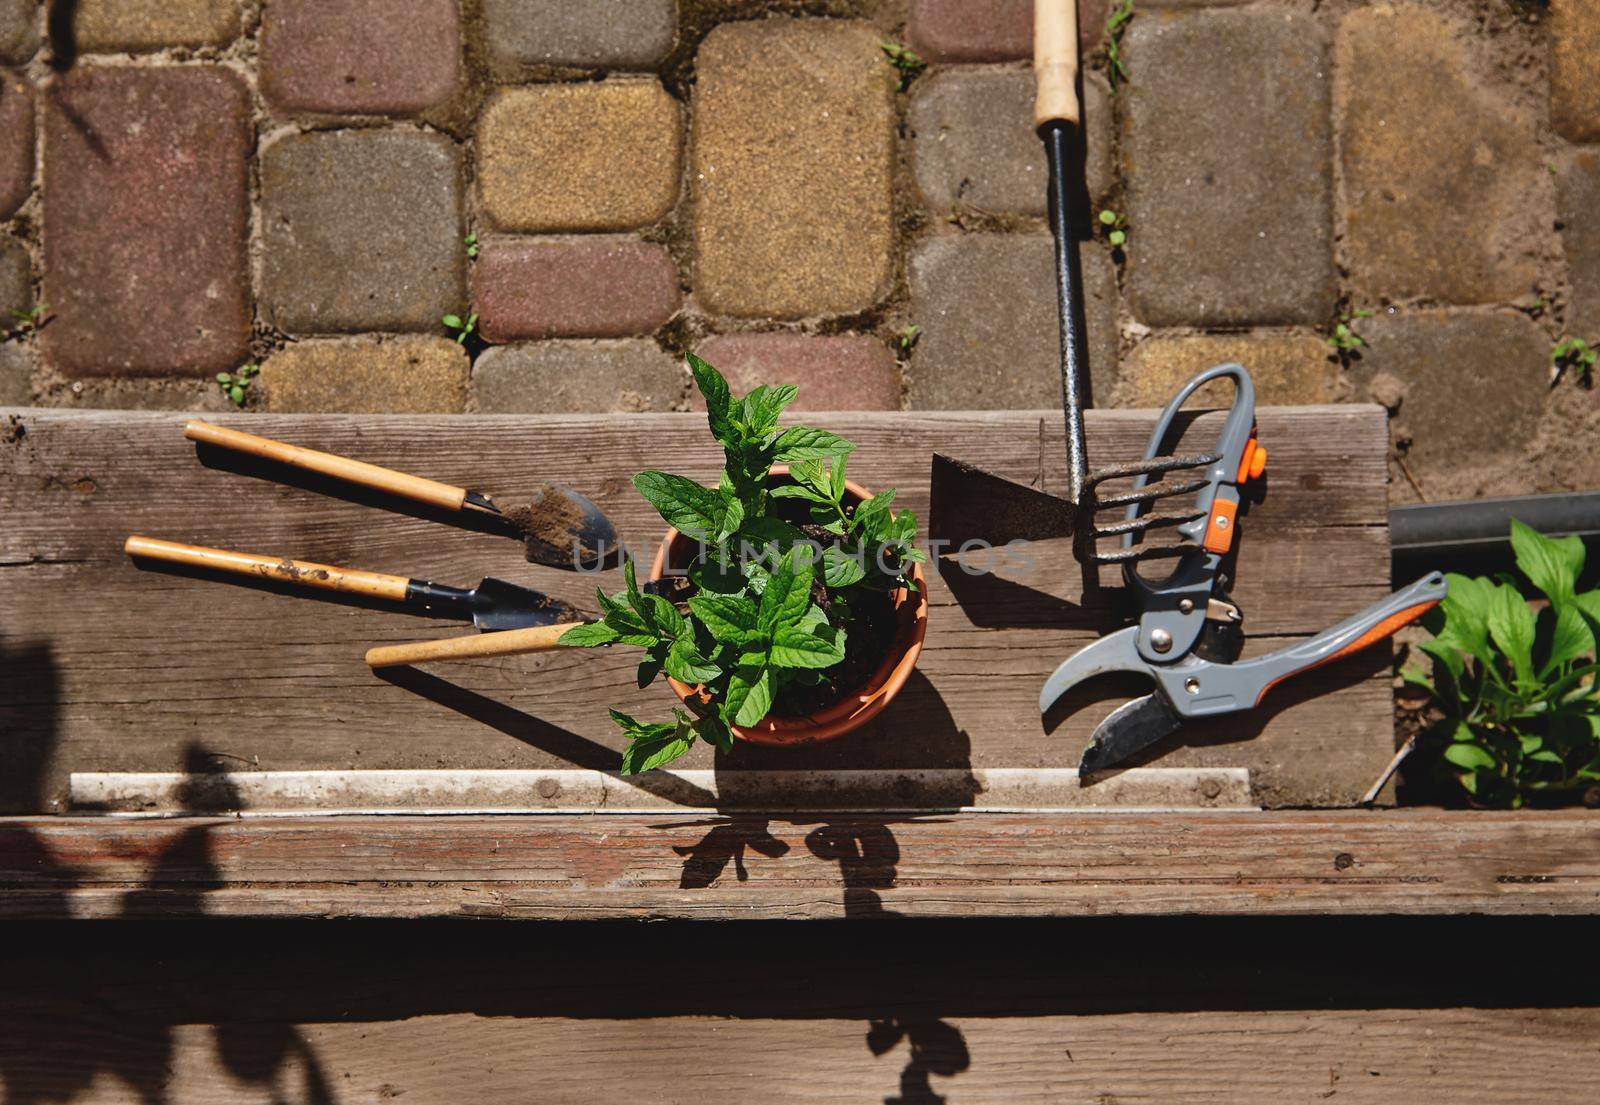 Flat lay composition with gardening tools, garden shears and a clay pot with planted mint leaves lying at the doorstep in a wooden gazebo. Still life by artgf